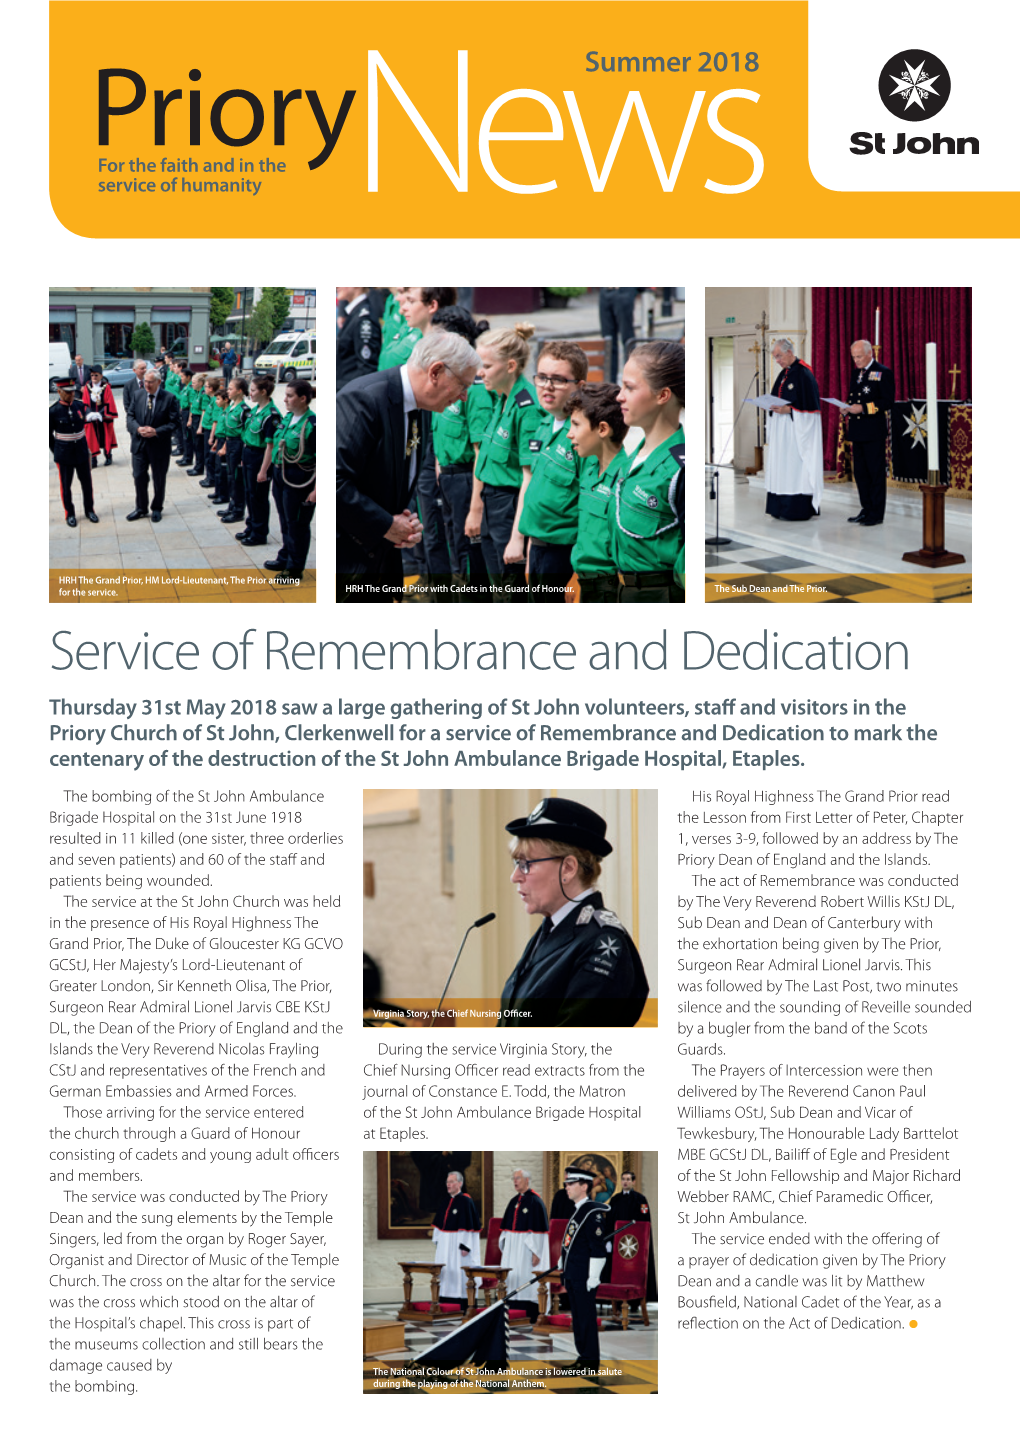 Service of Remembrance and Dedication